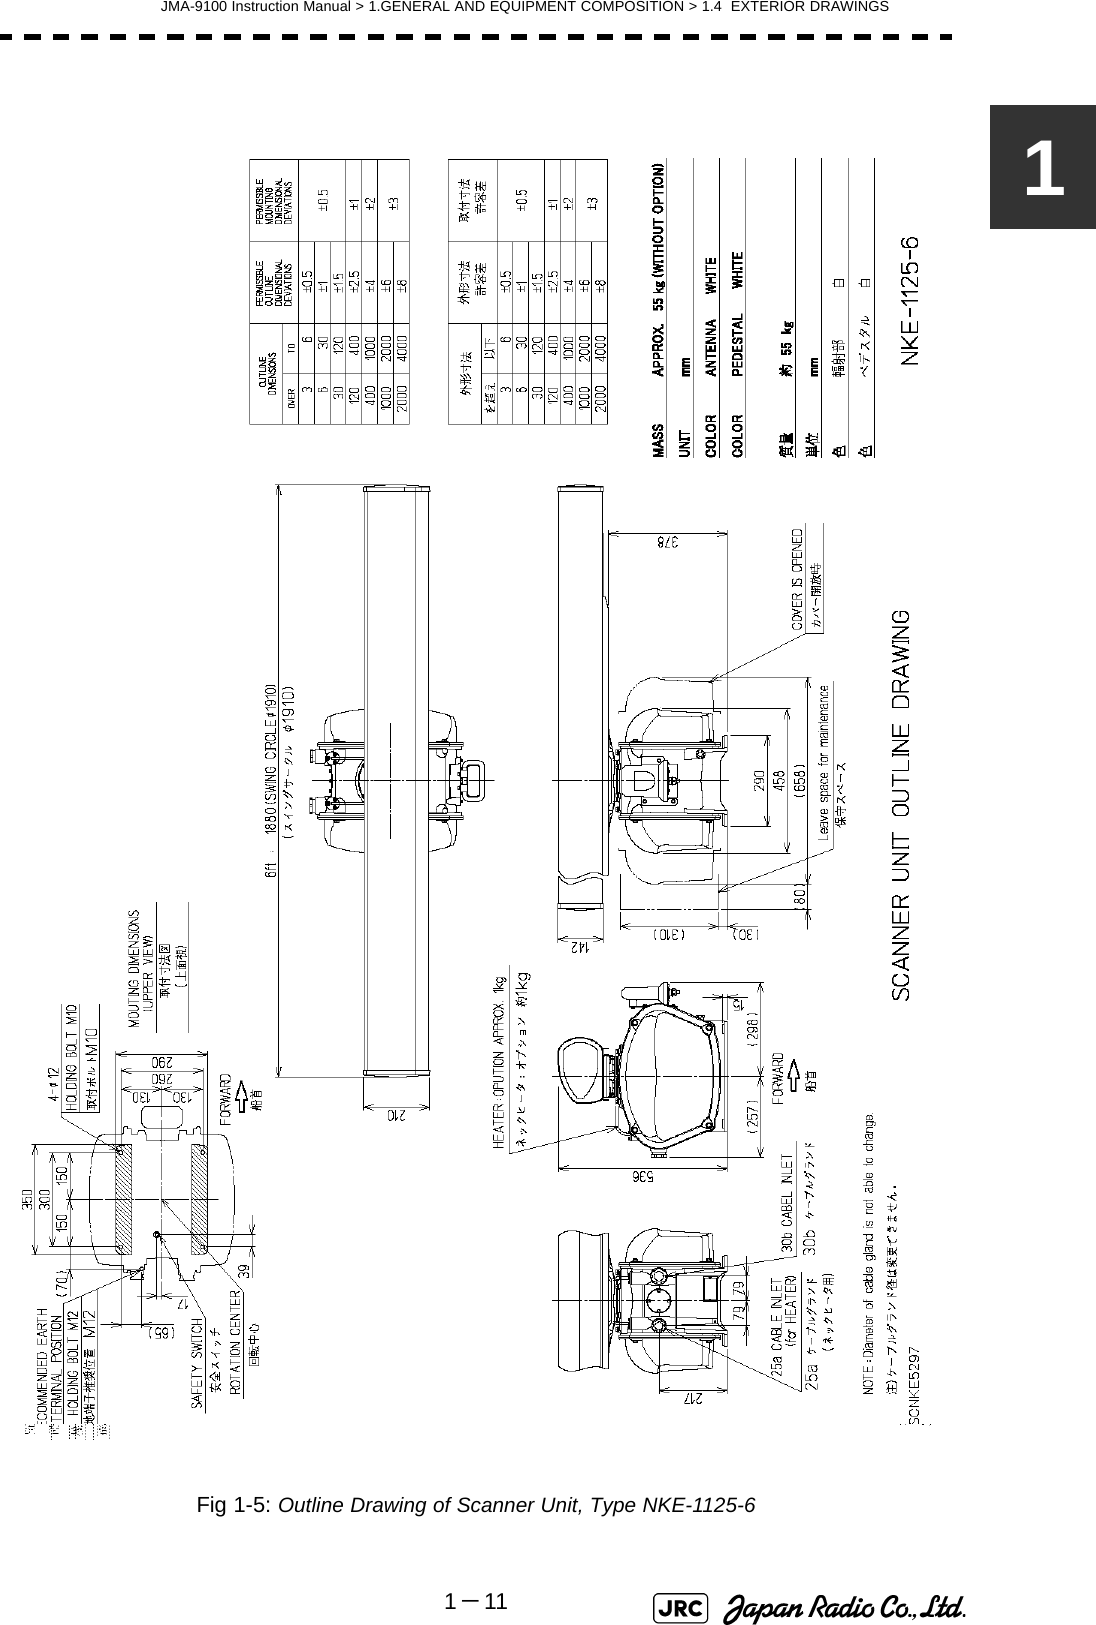 JMA-9100 Instruction Manual &gt; 1.GENERAL AND EQUIPMENT COMPOSITION &gt; 1.4  EXTERIOR DRAWINGS1－111Fig 1-5: Outline Drawing of Scanner Unit, Type NKE-1125-6